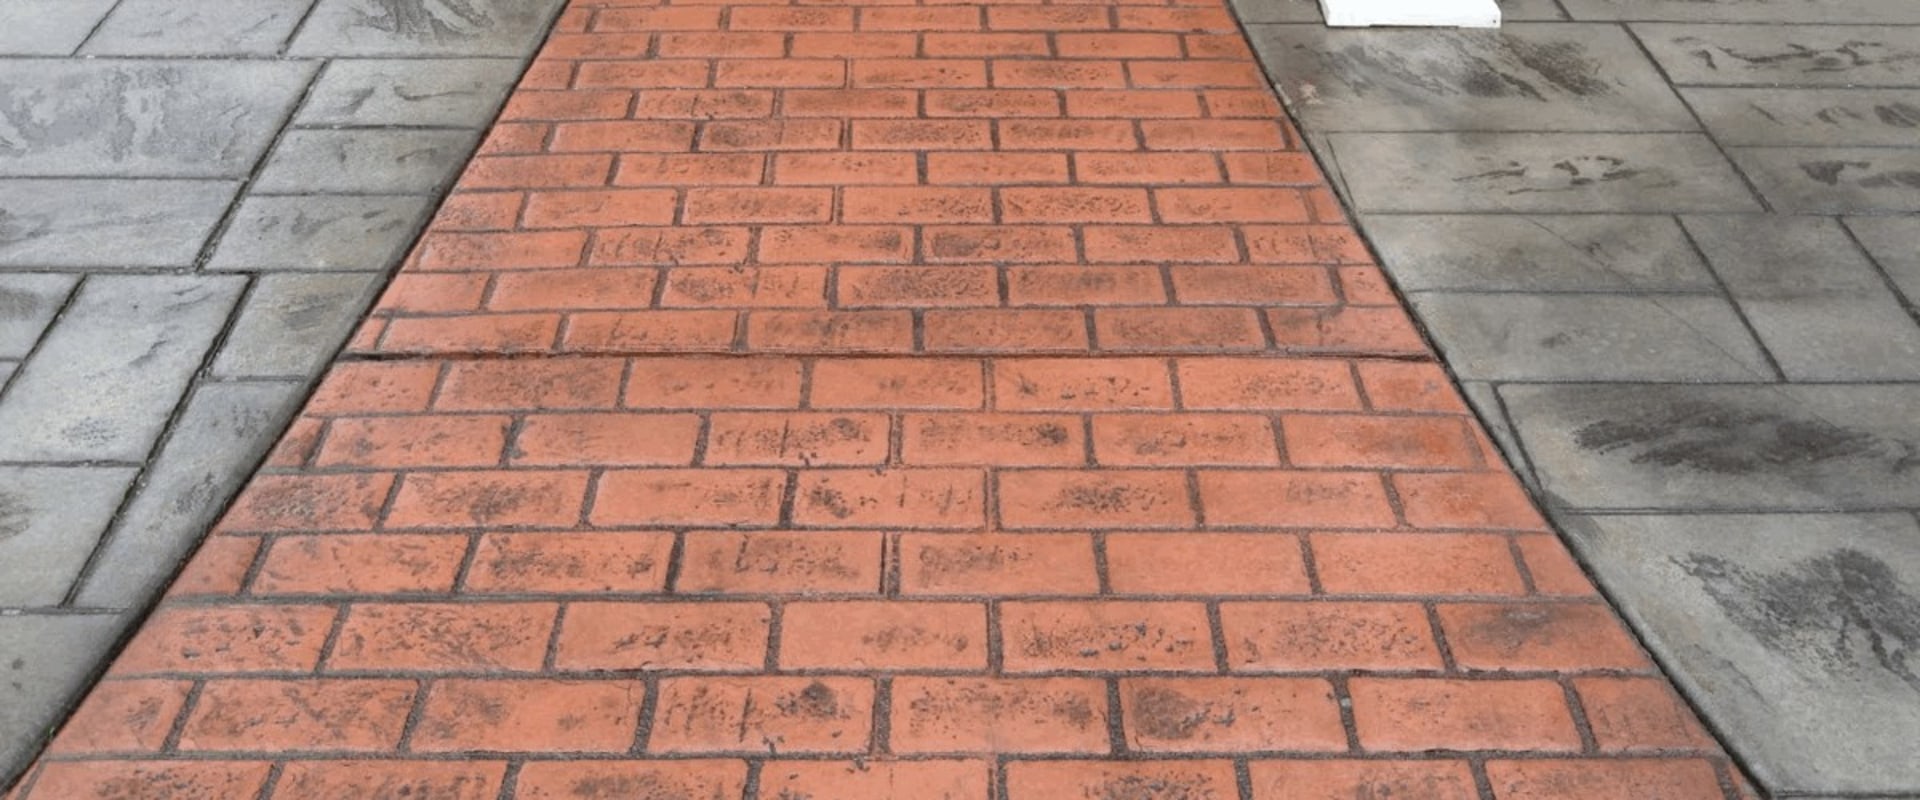 The Basics of Brick Stamped Concrete